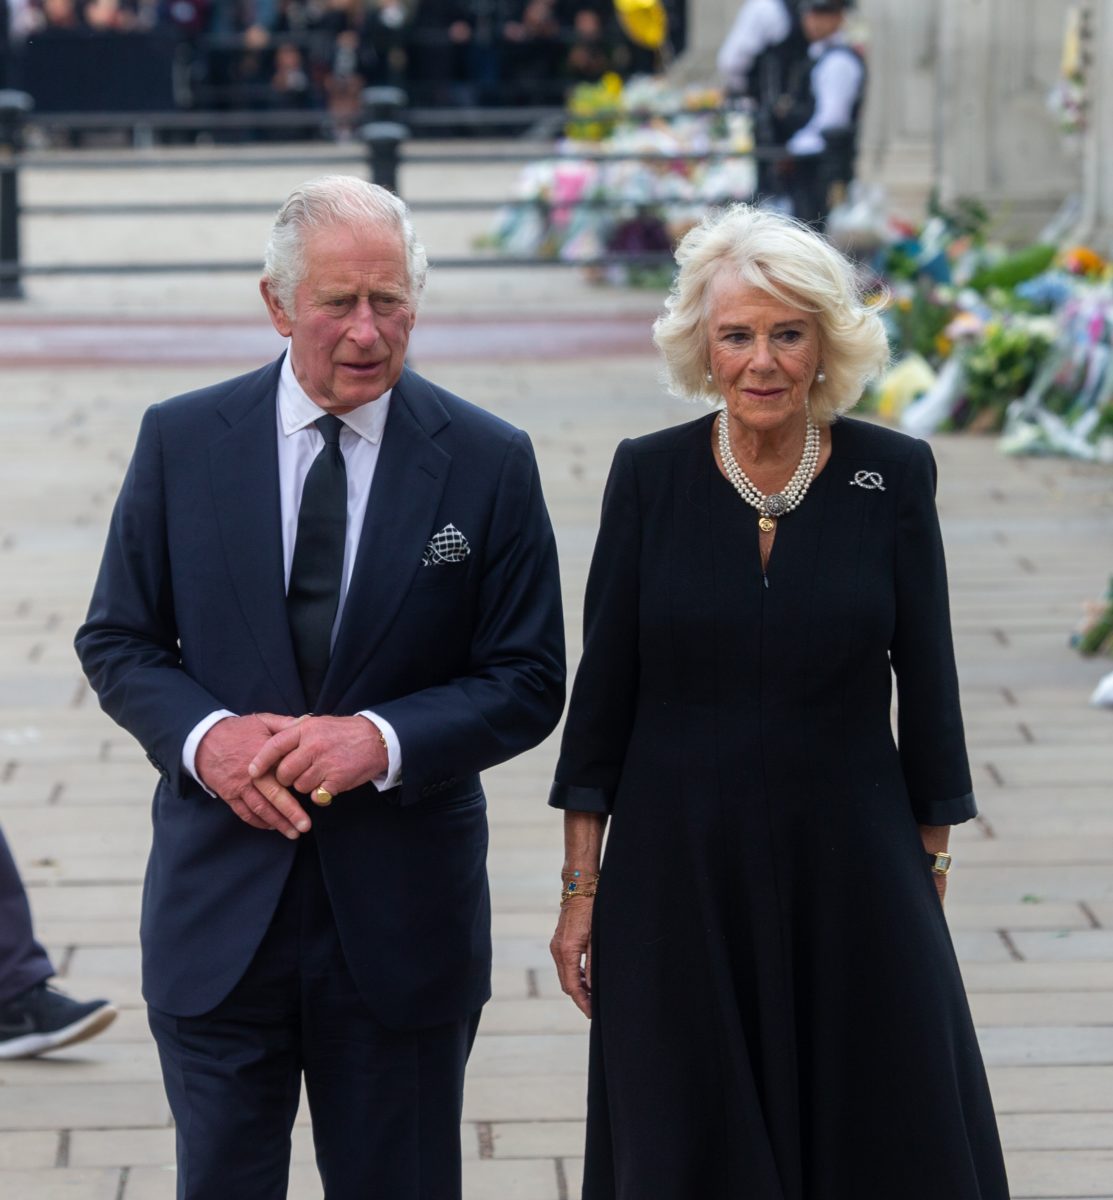 King Charles Speaks Out After Being Diagnosed With Cancer | Just minutes after Kensington Palace revealed that Princess Kate would likely be hospitalized for two weeks following an abdominal surgery, King Charles's health issues were also made public.